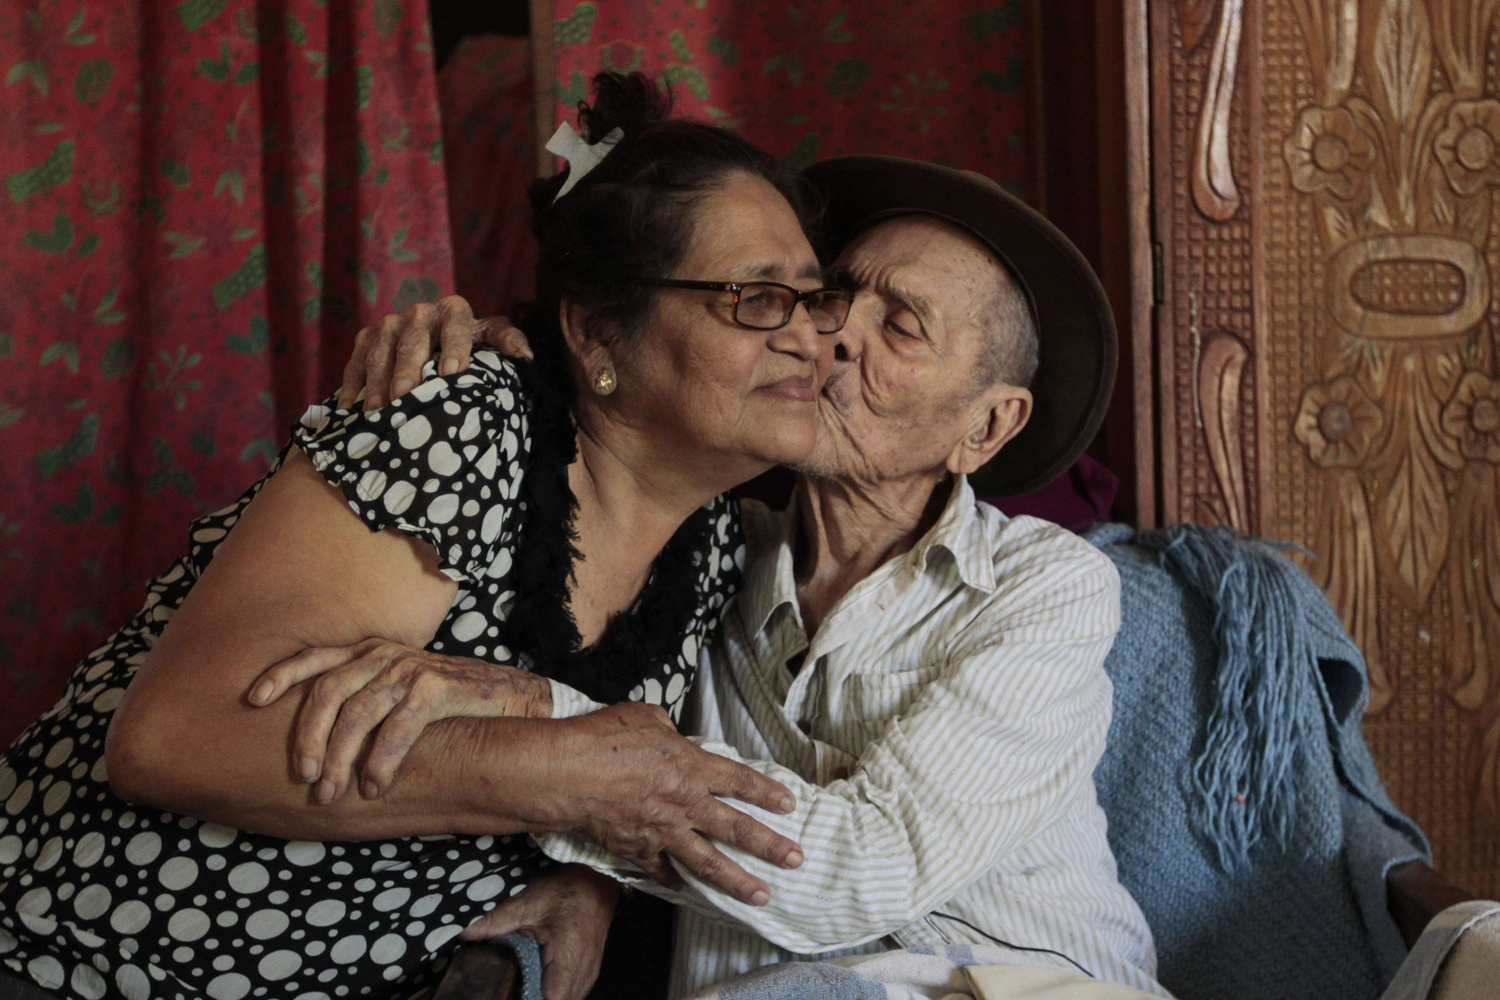 Hector Gaitan, 110, kisses his wife Nora Campo inside his home, at an abandoned station of the Nicaraguan Railway Company, the country's defunct railway in Managua.